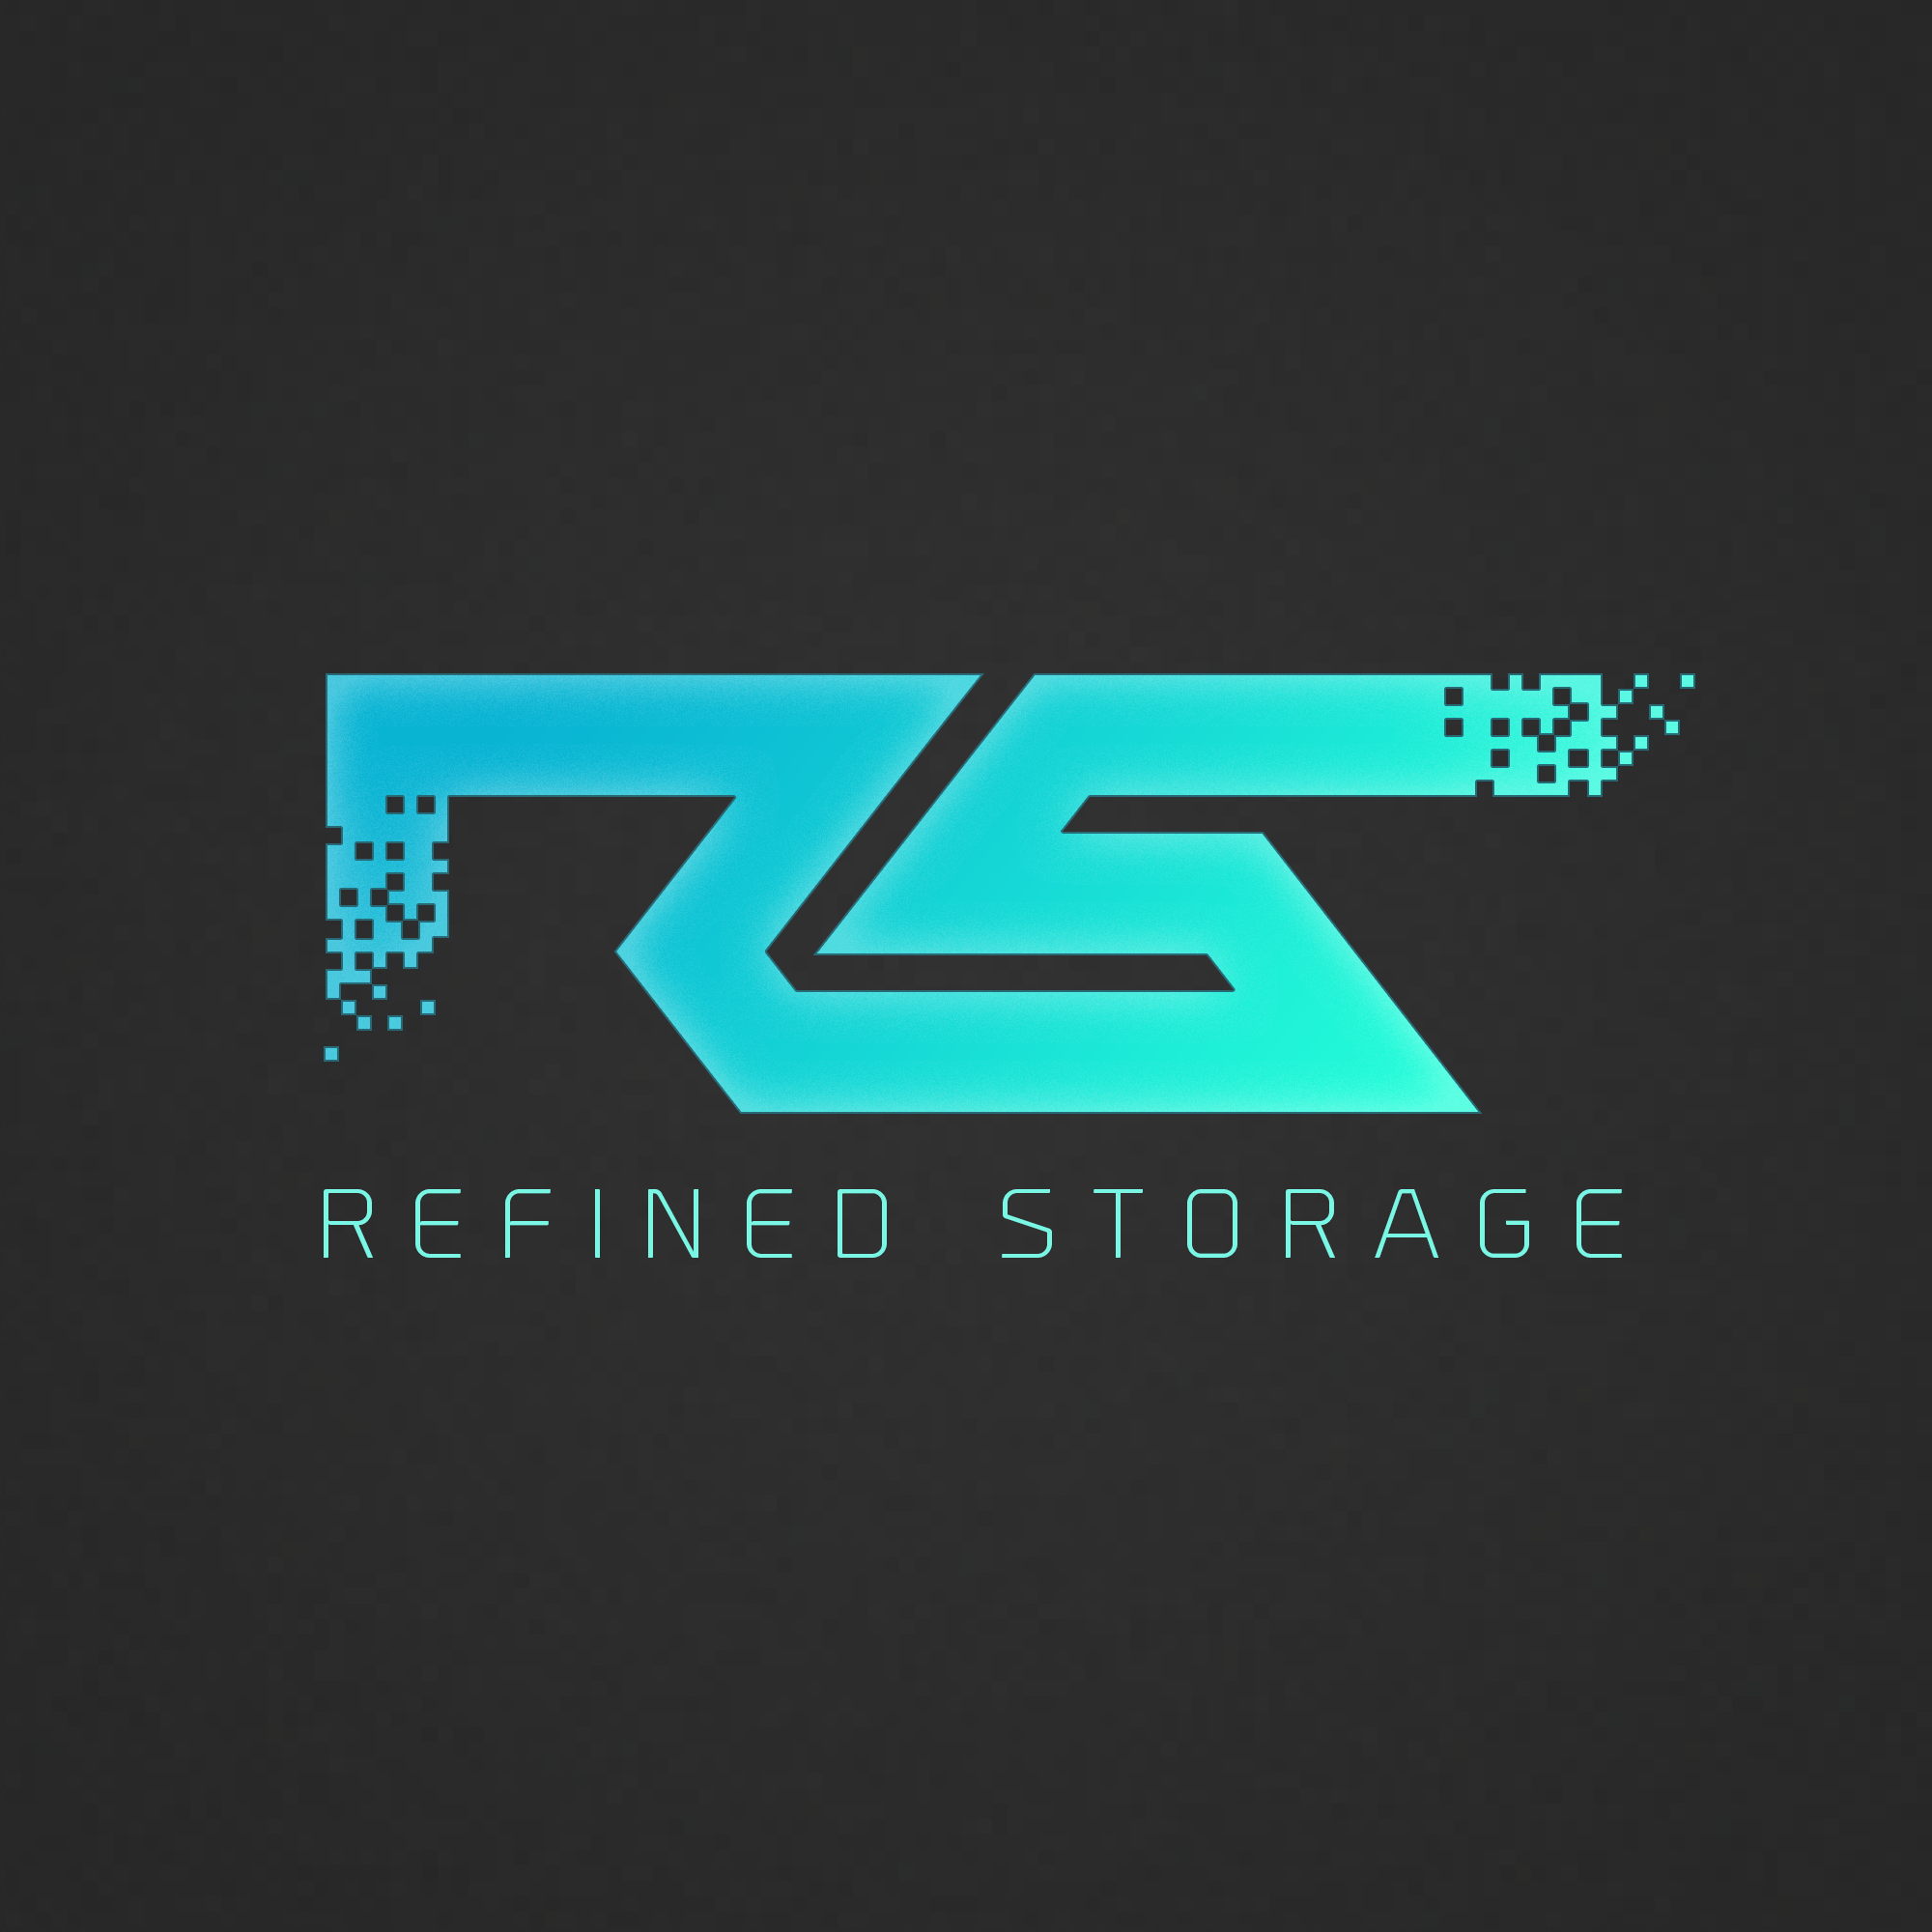 Refined Storage project avatar